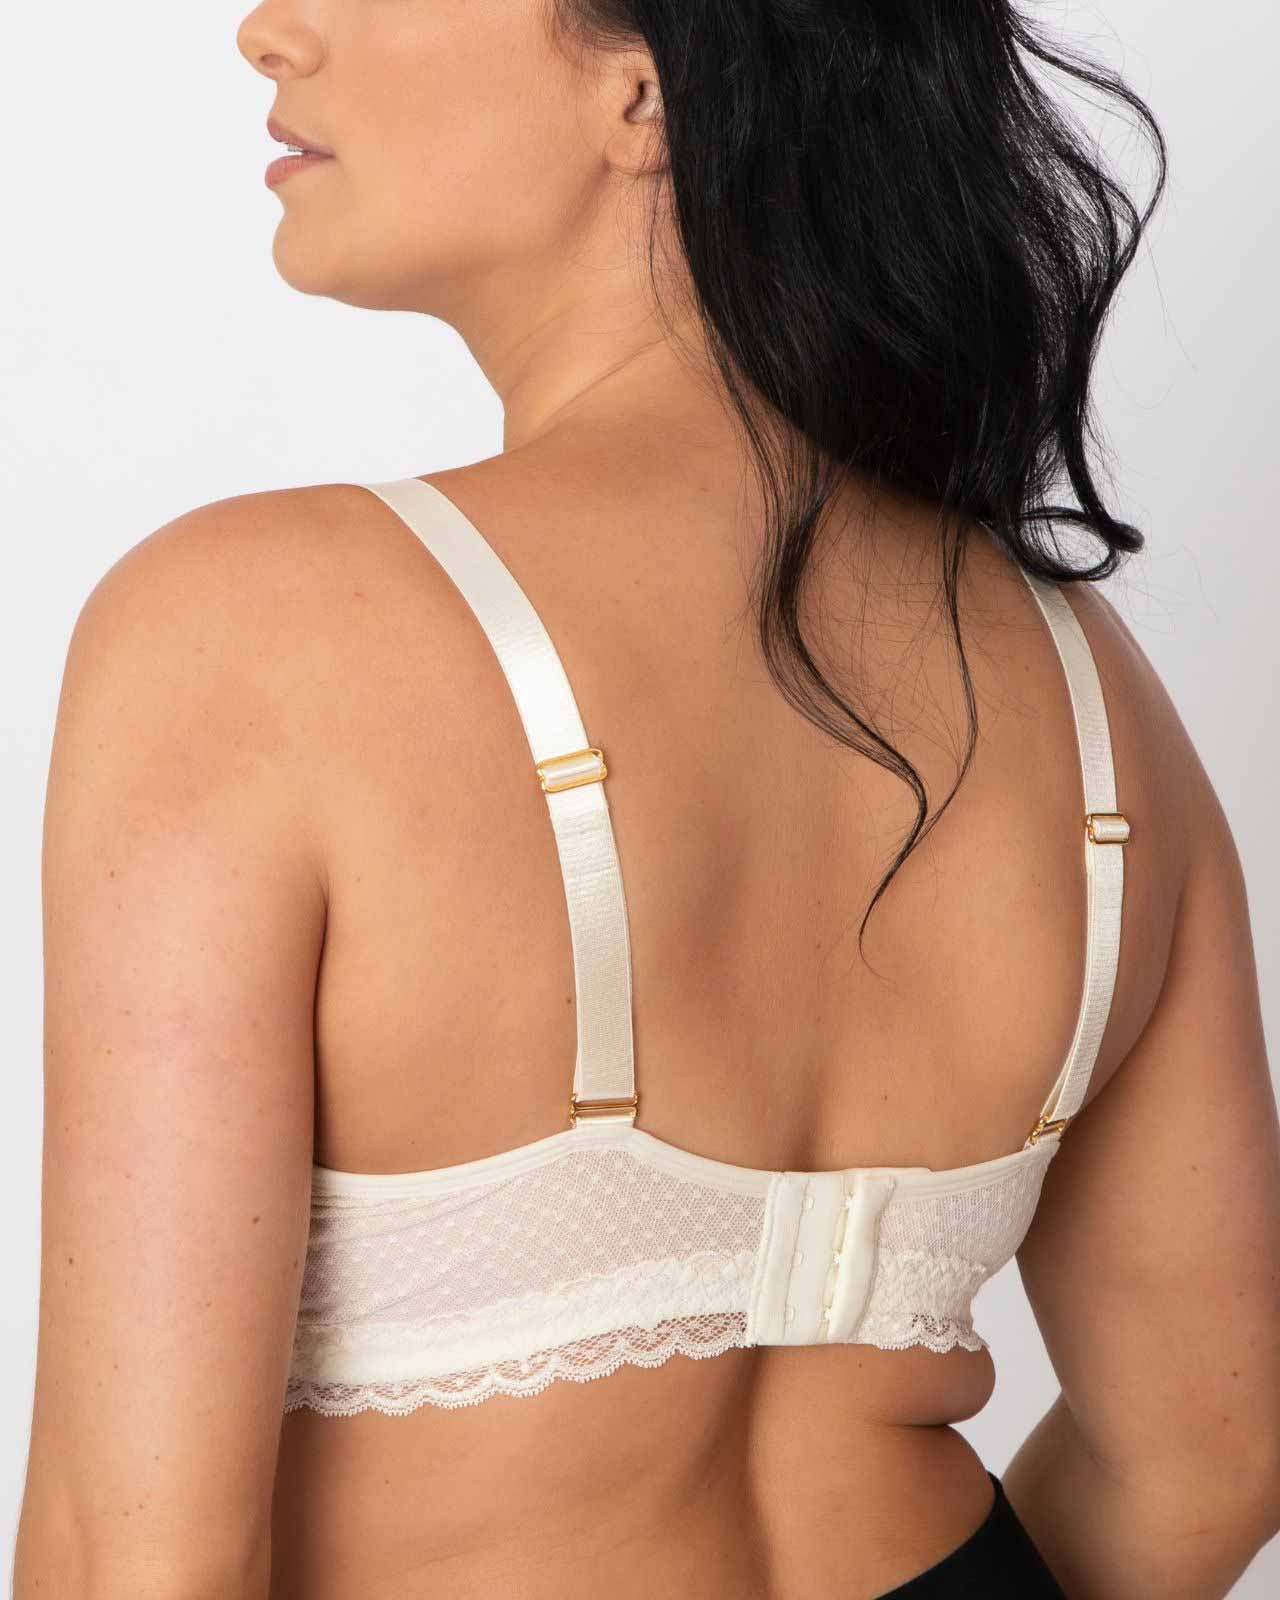 Mikilon Front Buckle Sexy Gathe r up Breast Milk Sleep Lace No